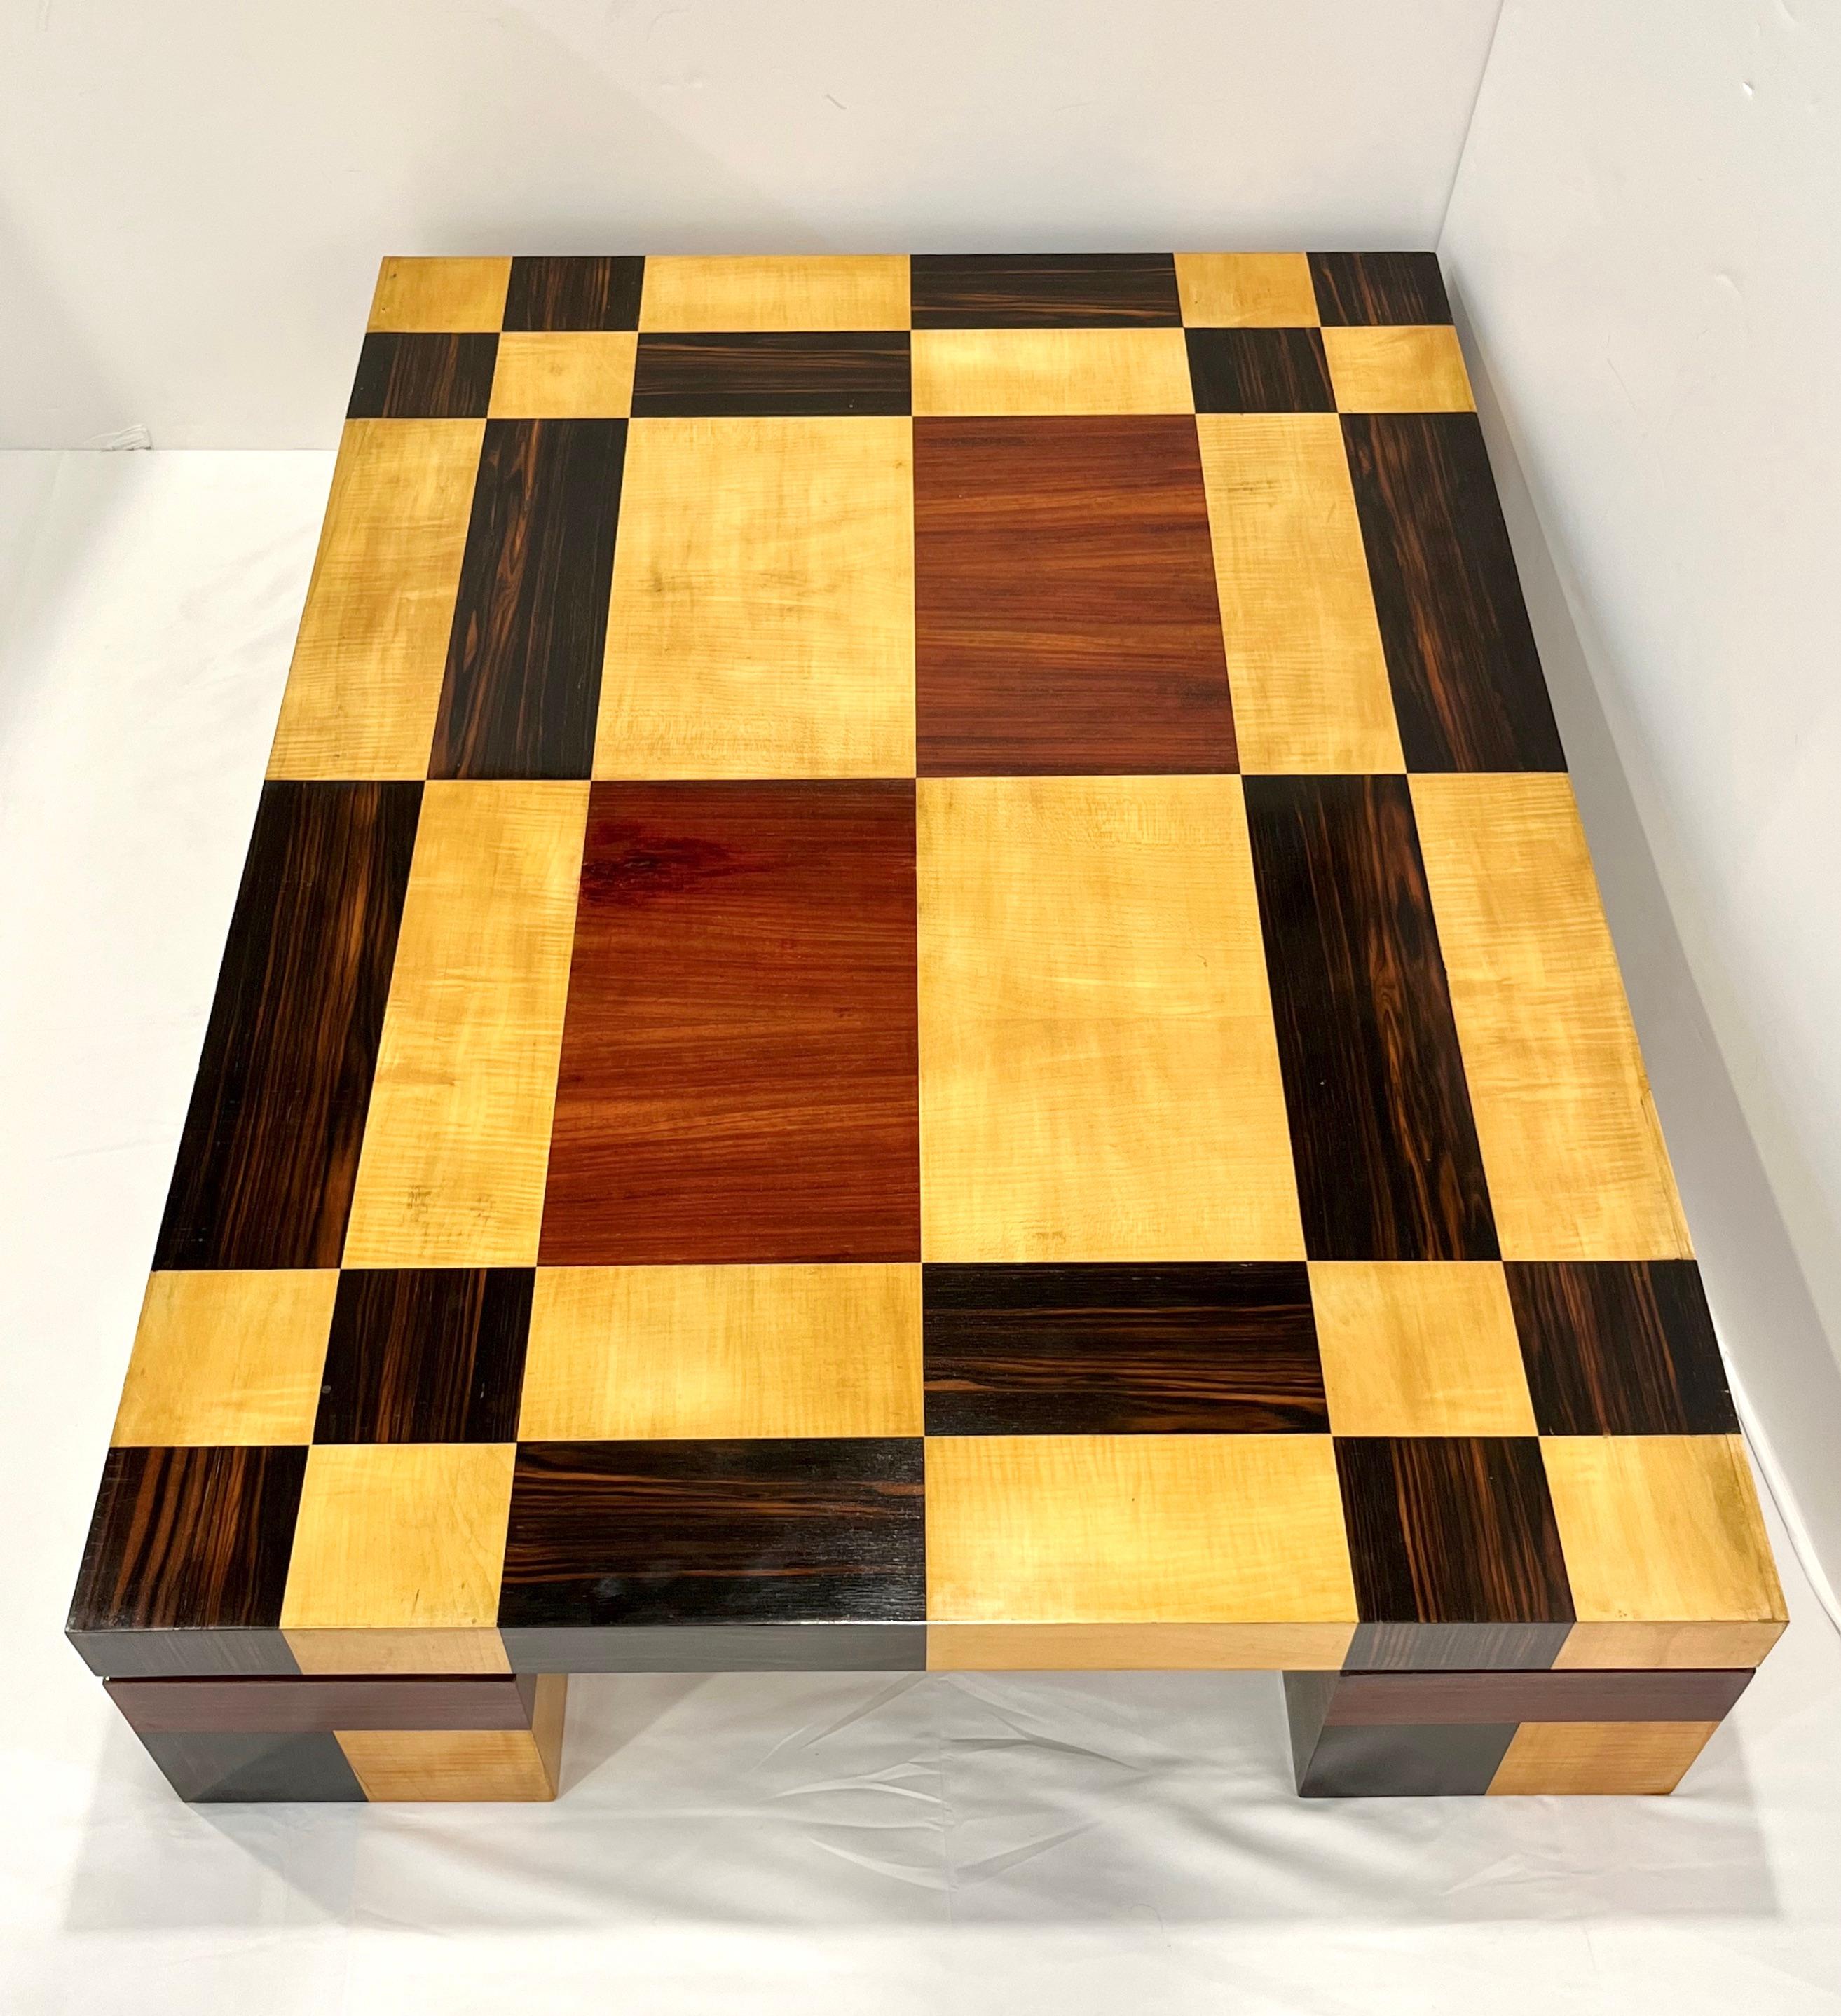 Italian vintage one-of-a-kind piece, from the 1970s, entirely handcrafted in 3 kinds of wood: maple, cherry wood, and walnut, each one cut in different rectangular shapes to create an enticing geometric pattern, a precursor of postmodern style. The